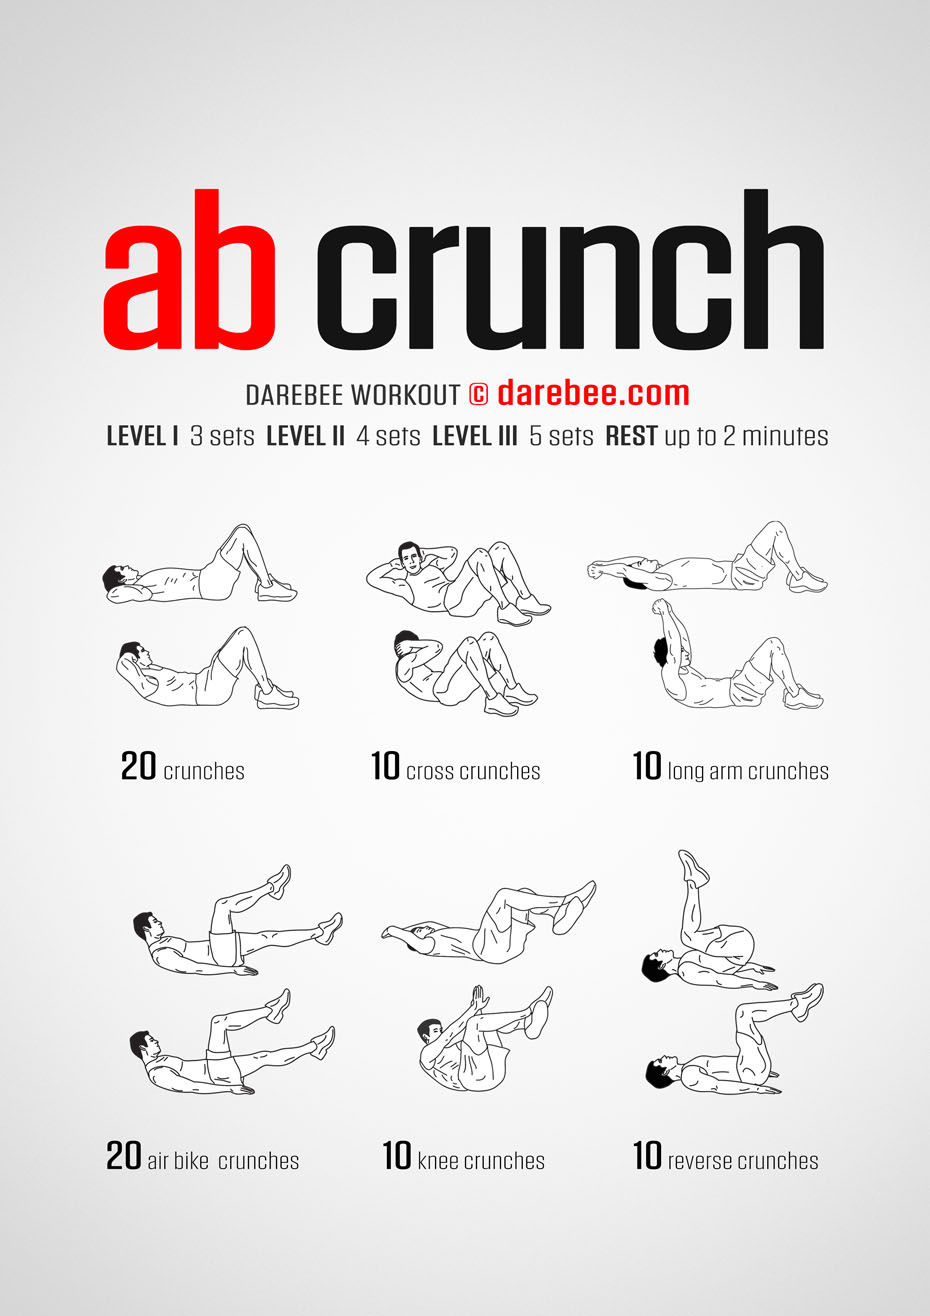 Ab Crunch Workout is a DAREBEE home fitness no-equipment abs strength workout you can do at home to get stronger abs without any equipment.